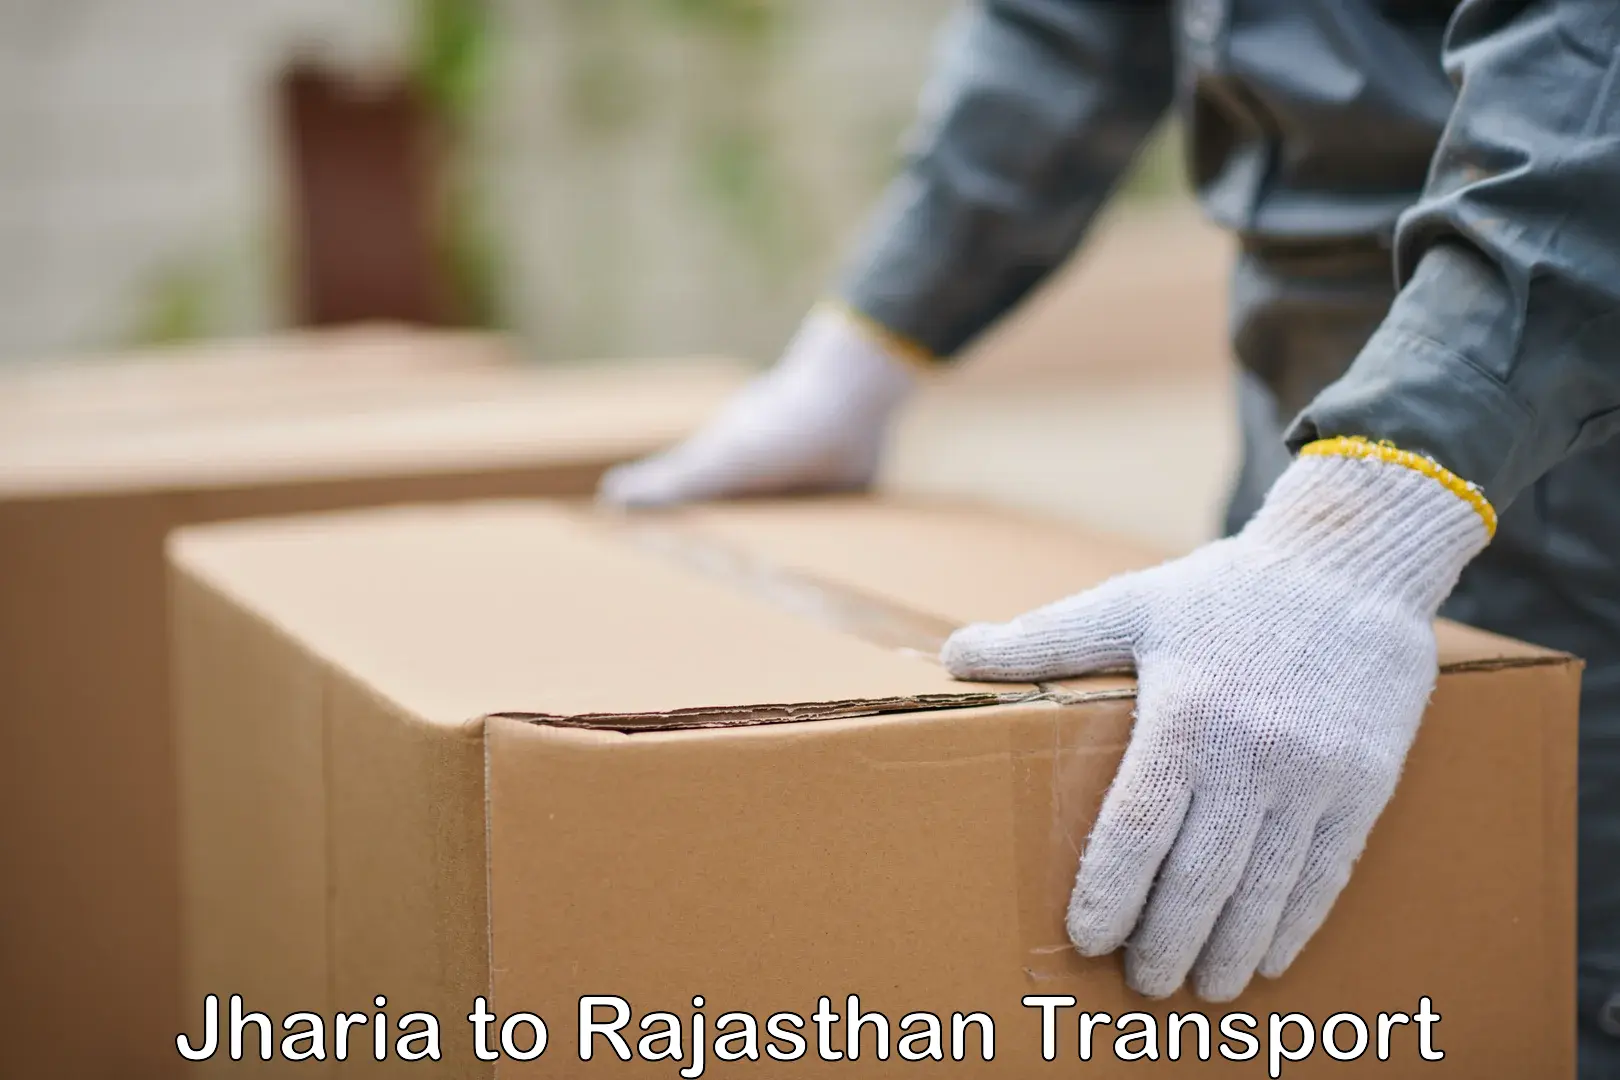 Pick up transport service Jharia to Rajasthan